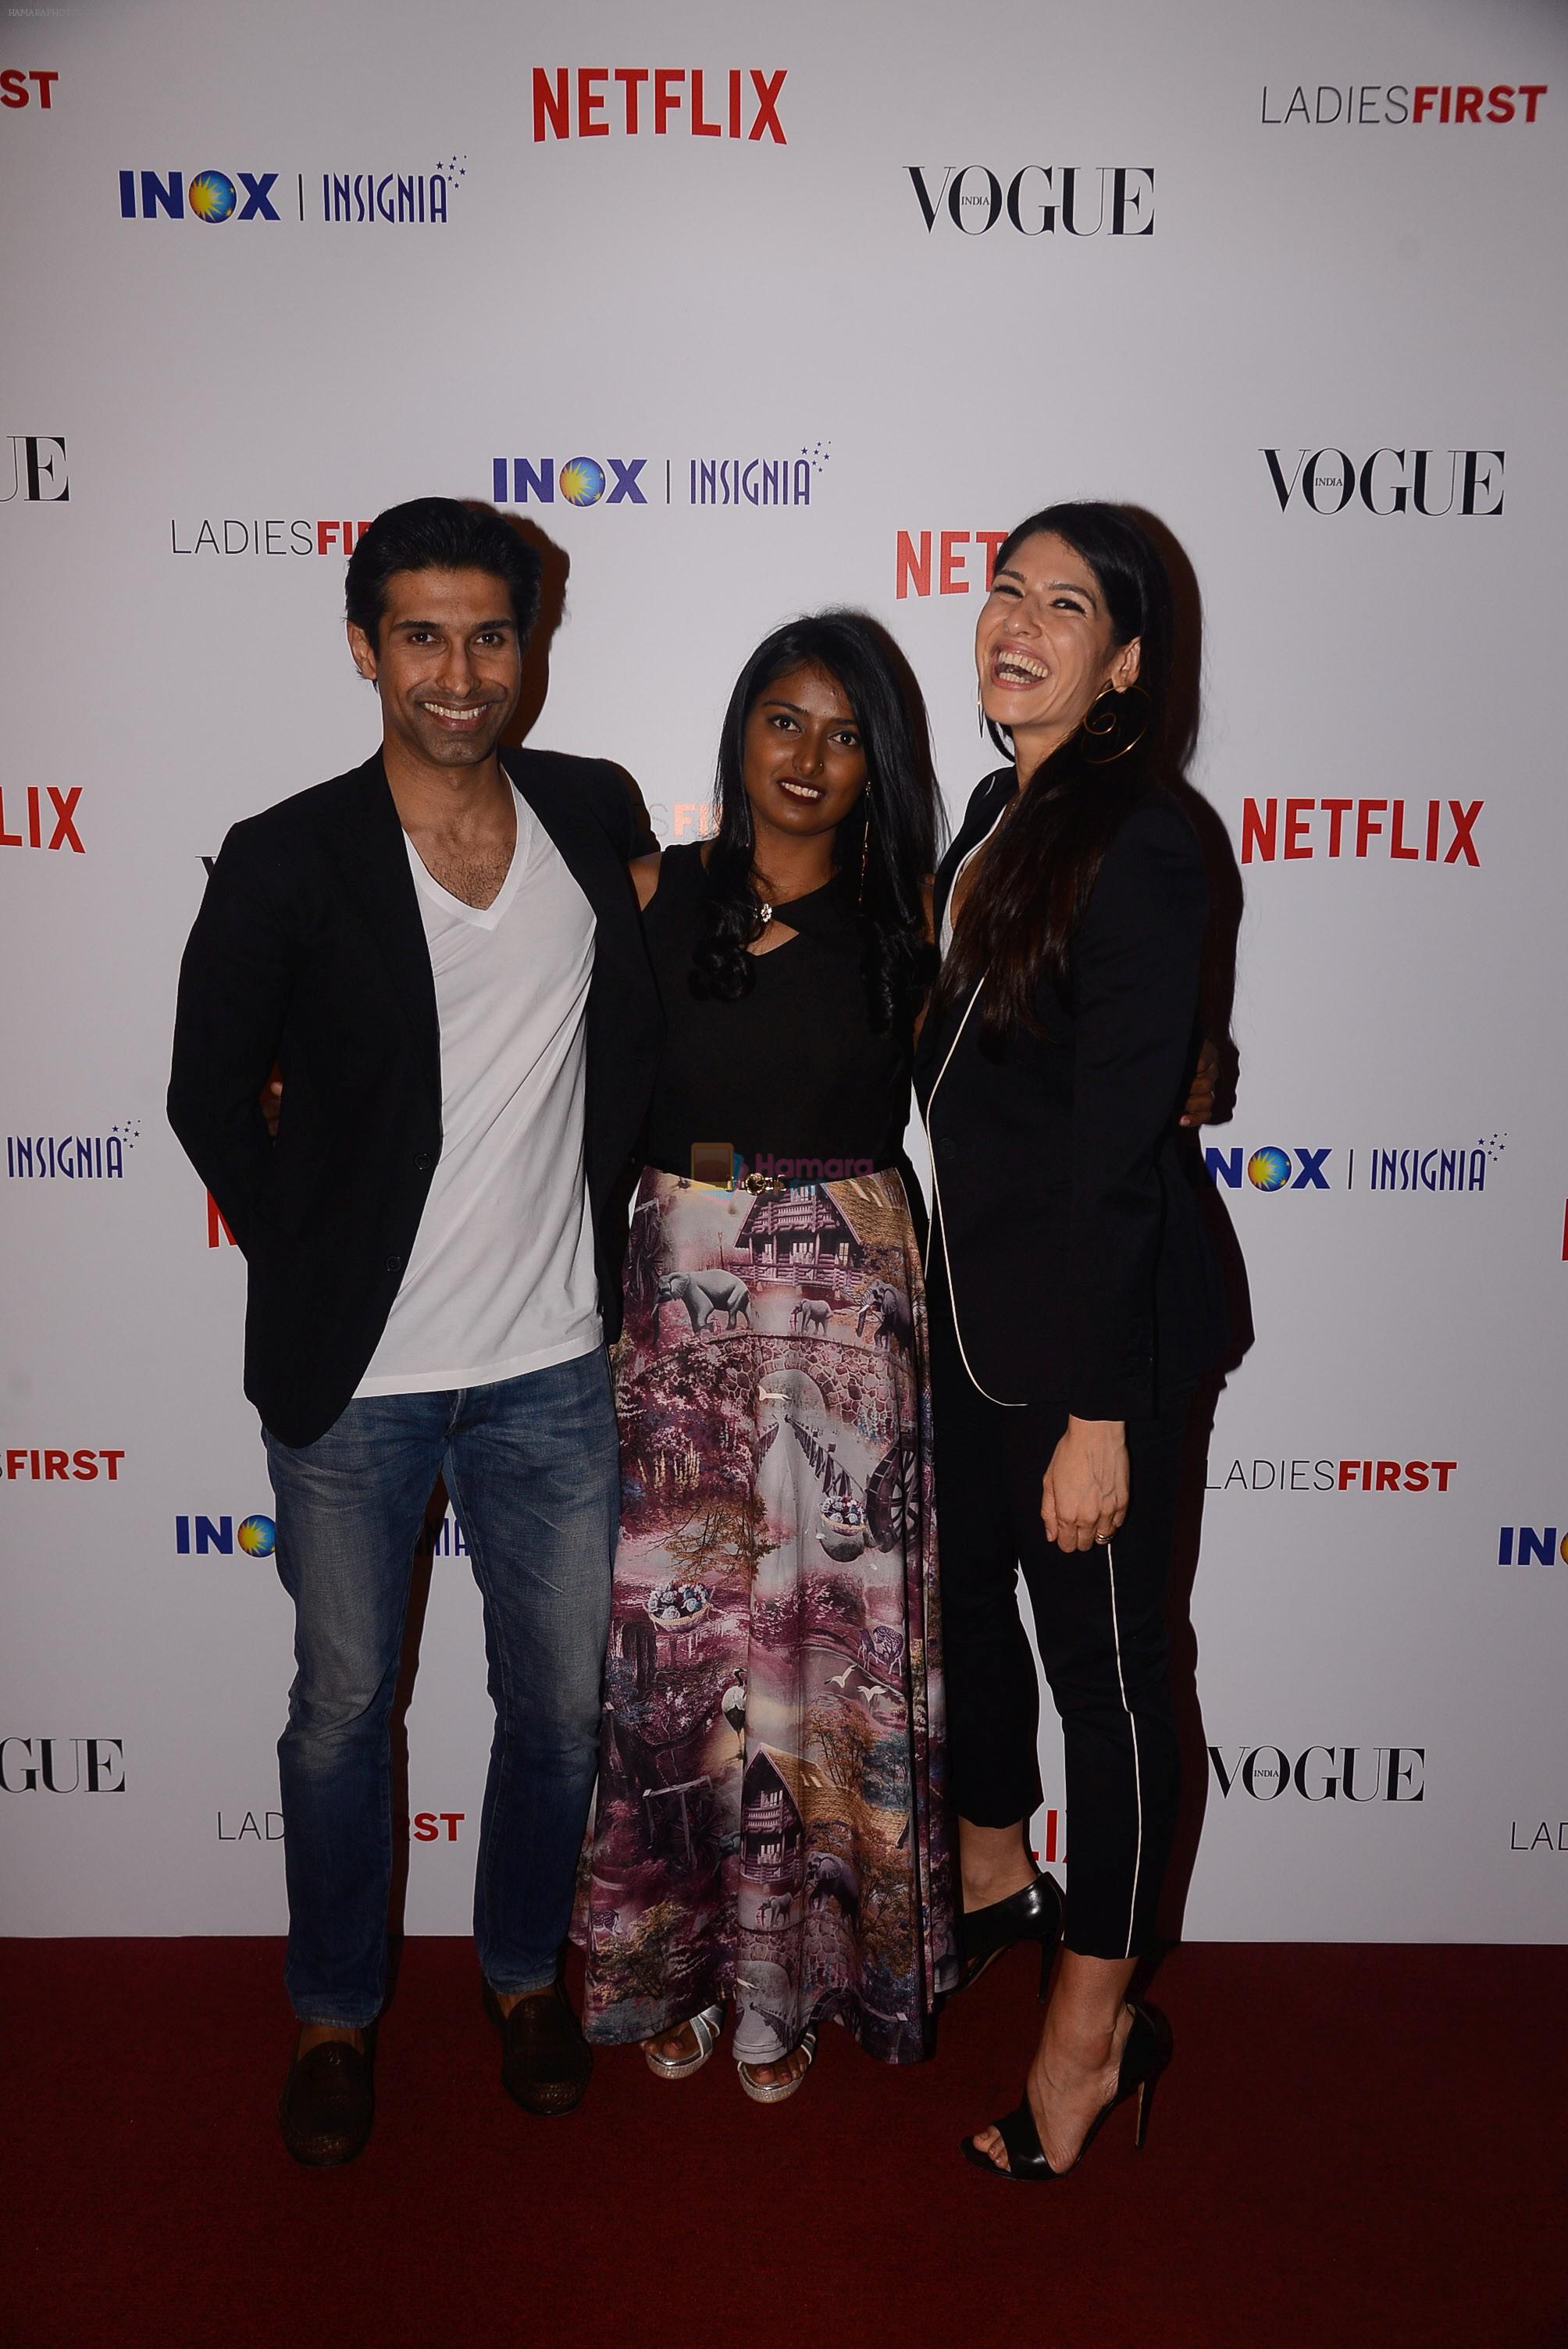 Uraaz, Shaana and Deepika at the Premier of _Ladies First_- The First Original Netflix Documentary that chronicles the life of World No 1 Archer, Deepika Kumari on 8th March 2018